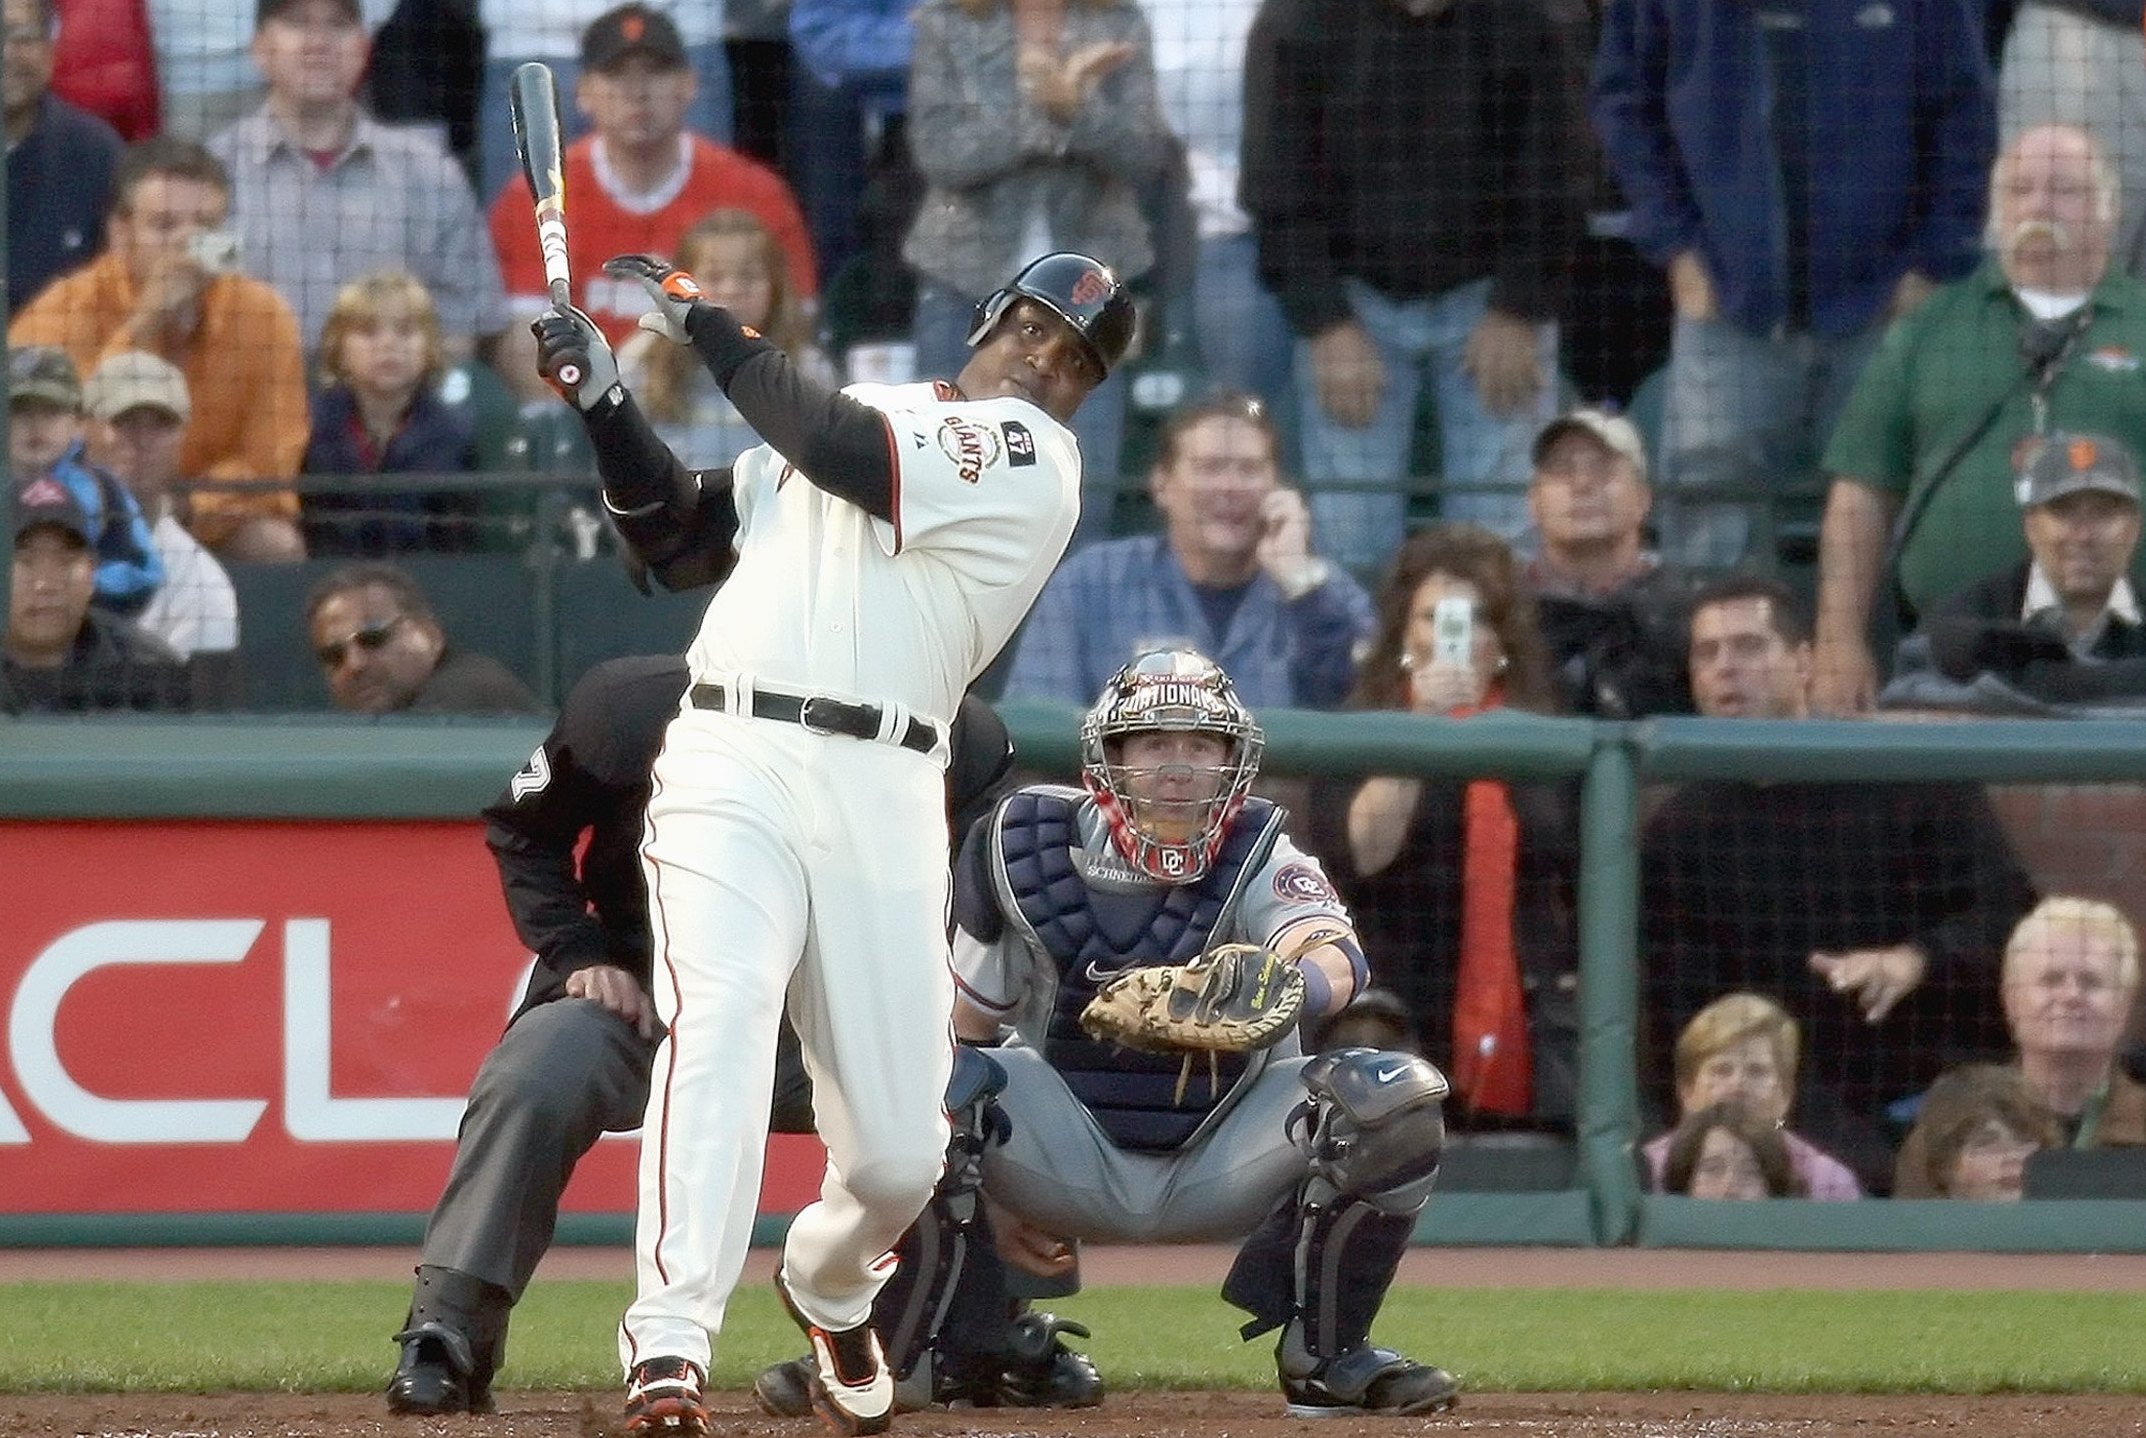 2021 Hall of Fame: The Case for Barry Bonds - Bucs Dugout